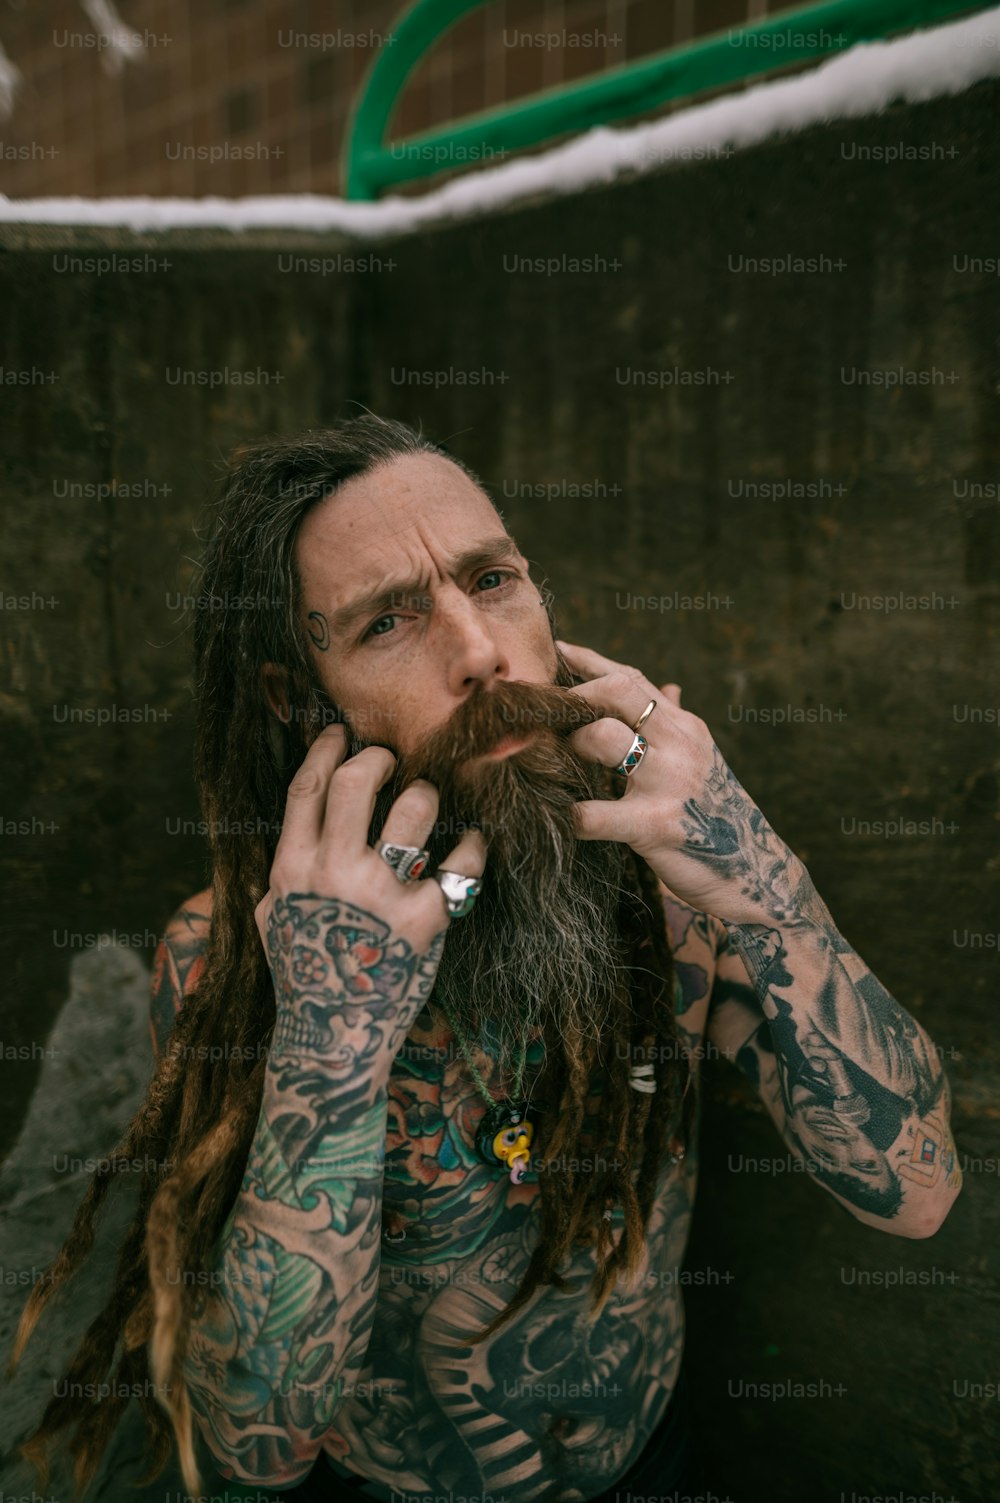 a man with long hair and tattoos on his face talking on a cell phone